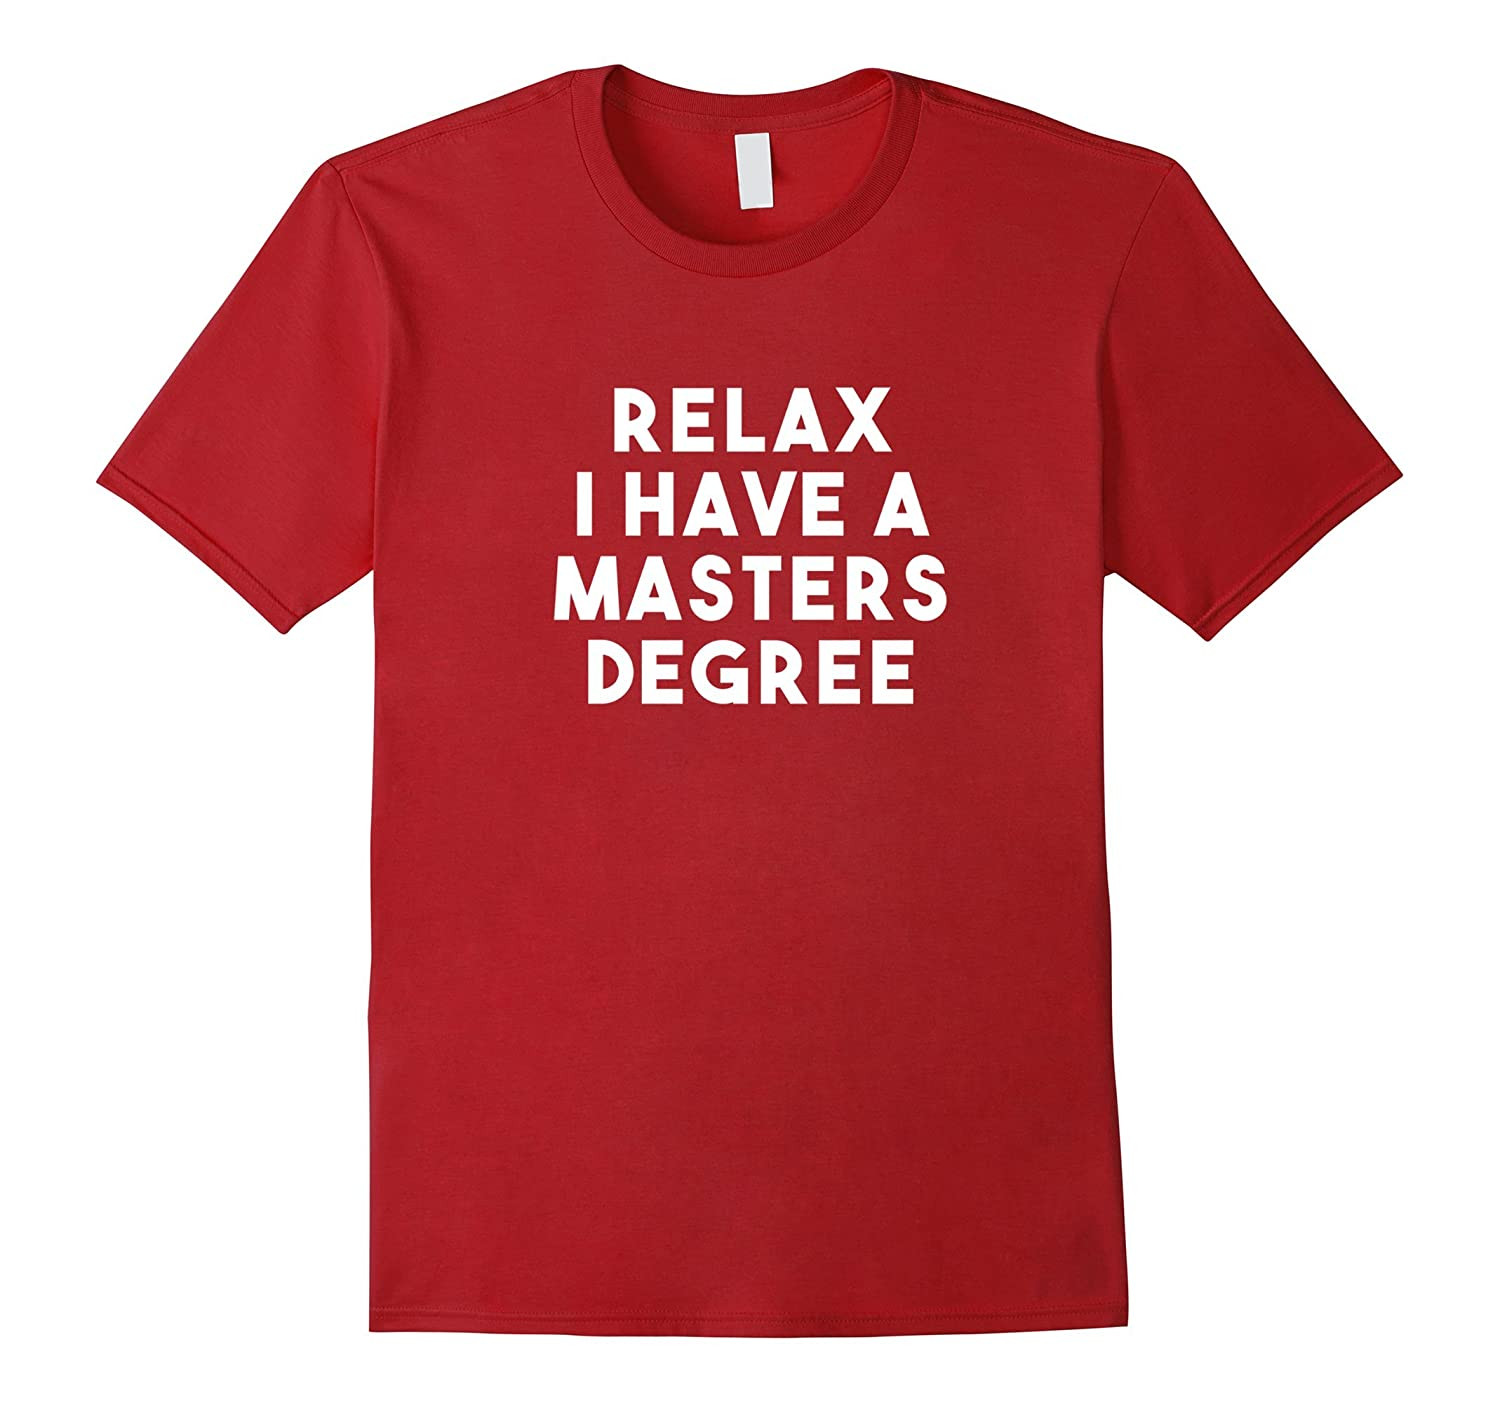 Graduation Gift Ideas For Her Masters Degree
 Funny Grad School Graduation Gift for him her Masters